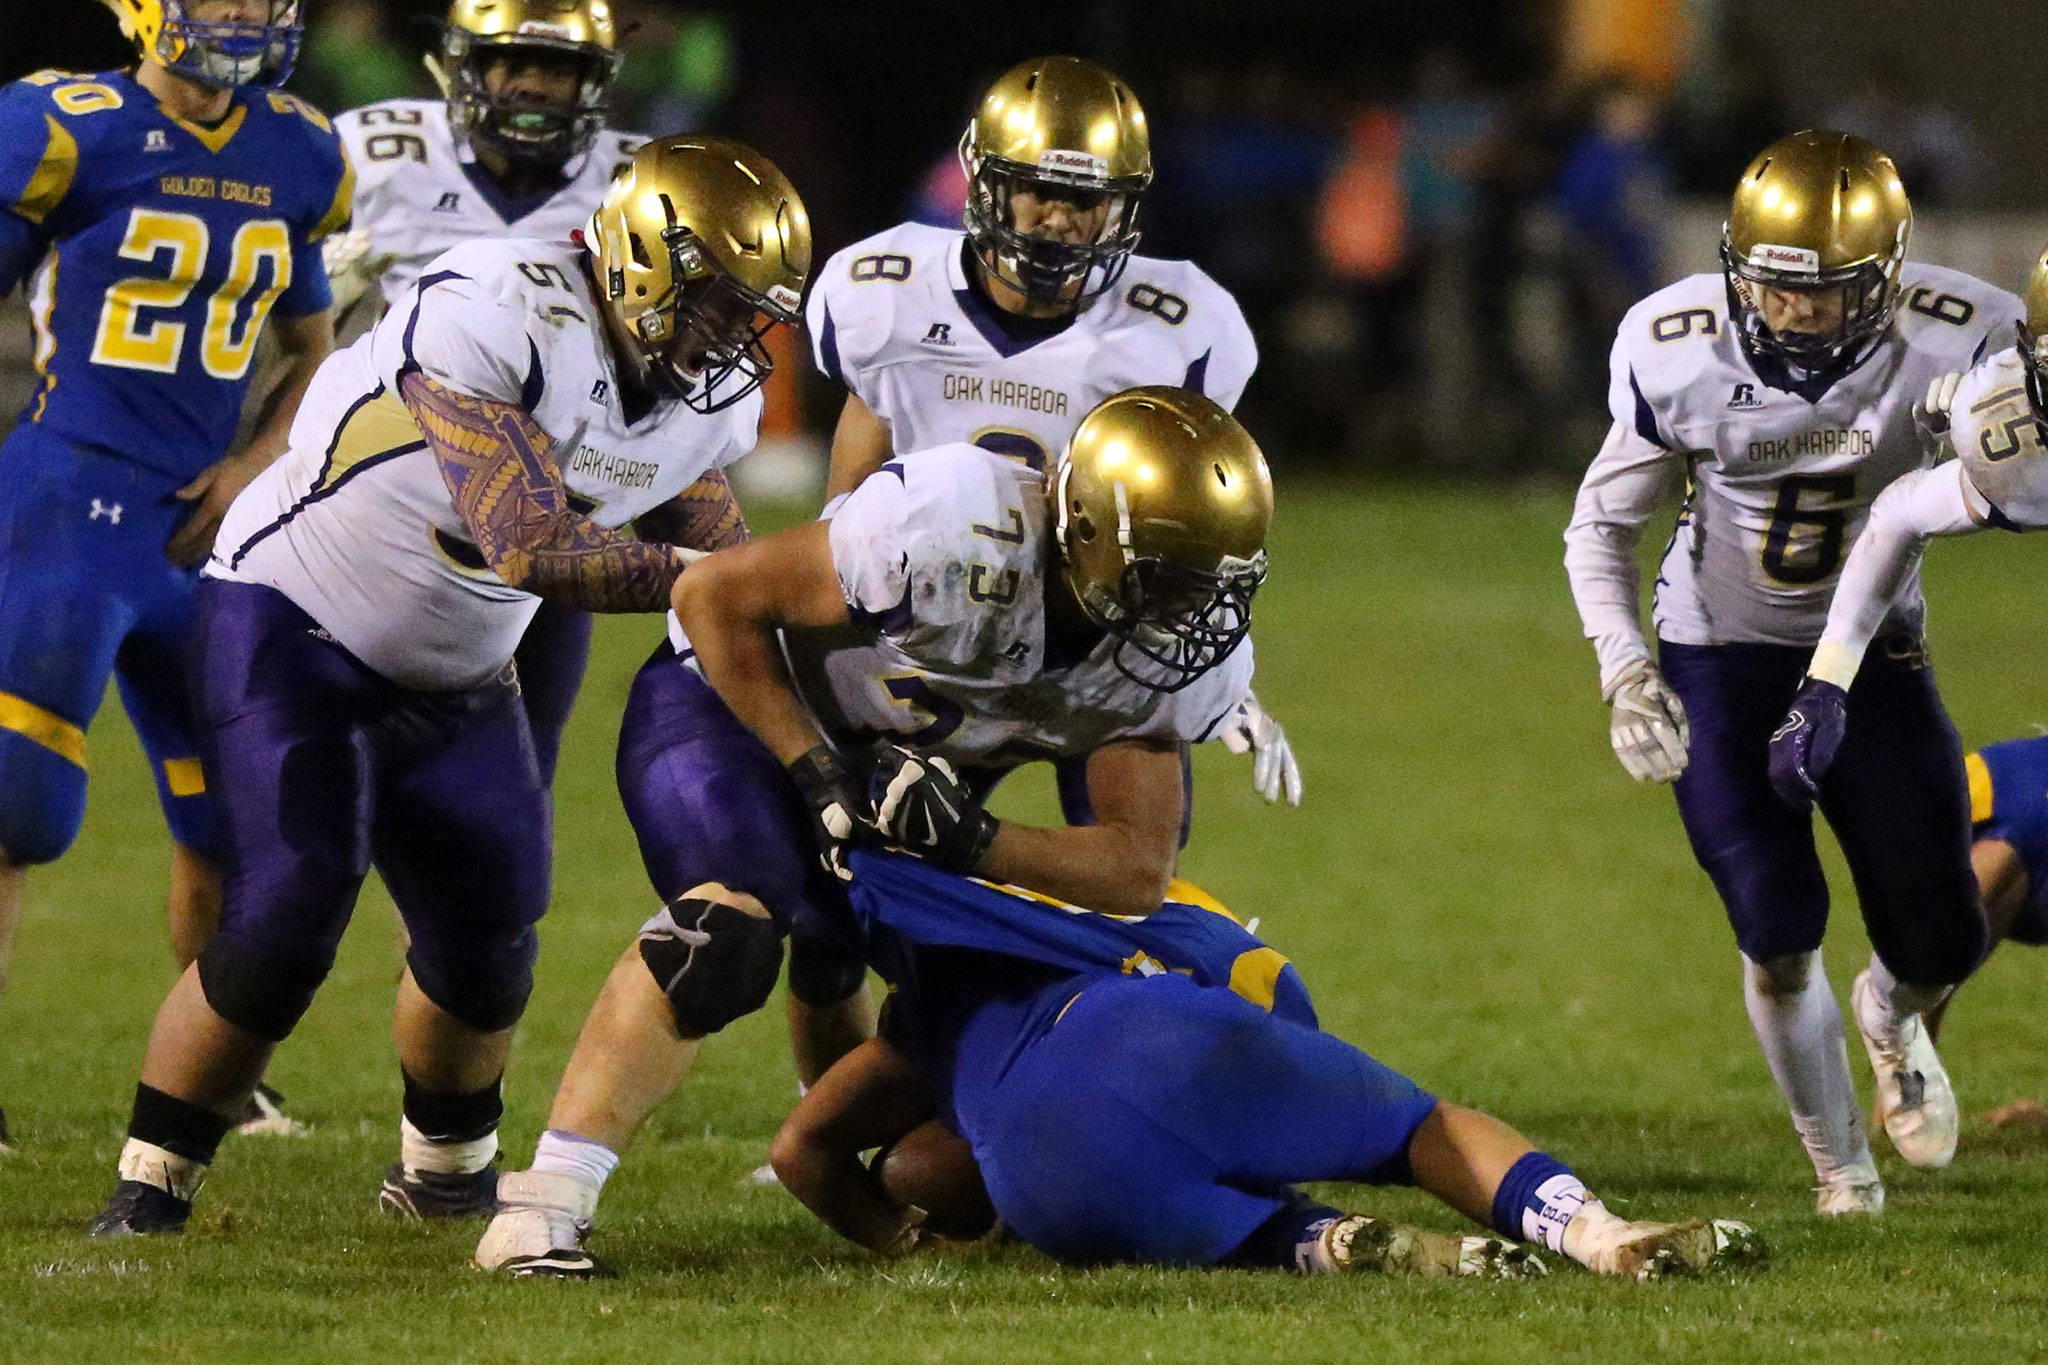 The Wildcats trap a Ferndale ball carrier in last year’s game. (Photo by John Fisken)